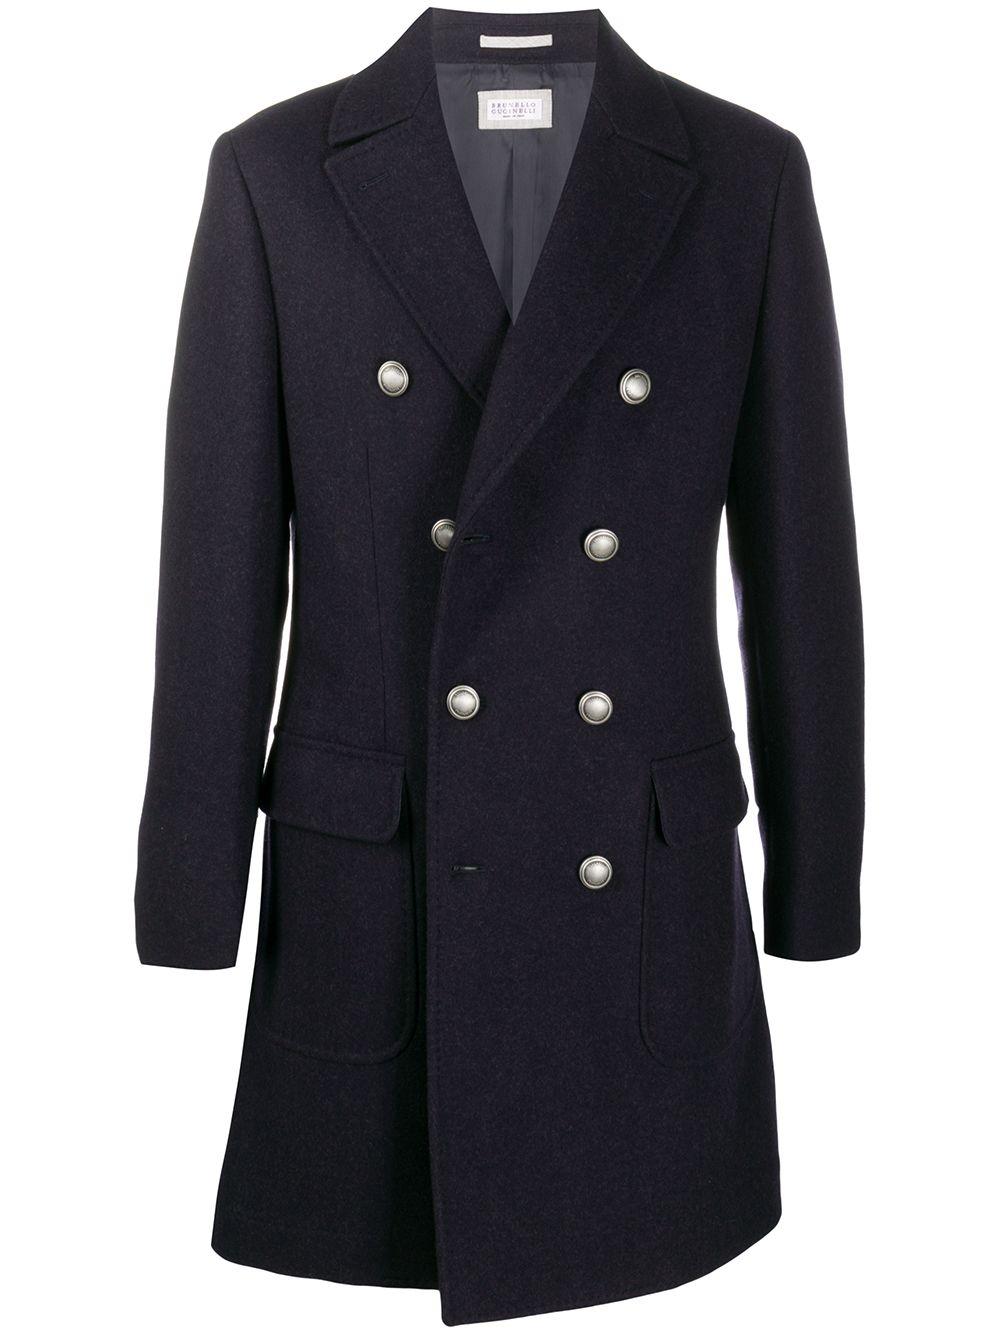 Brunello Cucinelli Wool Double Breasted Coat in Blue for Men - Lyst